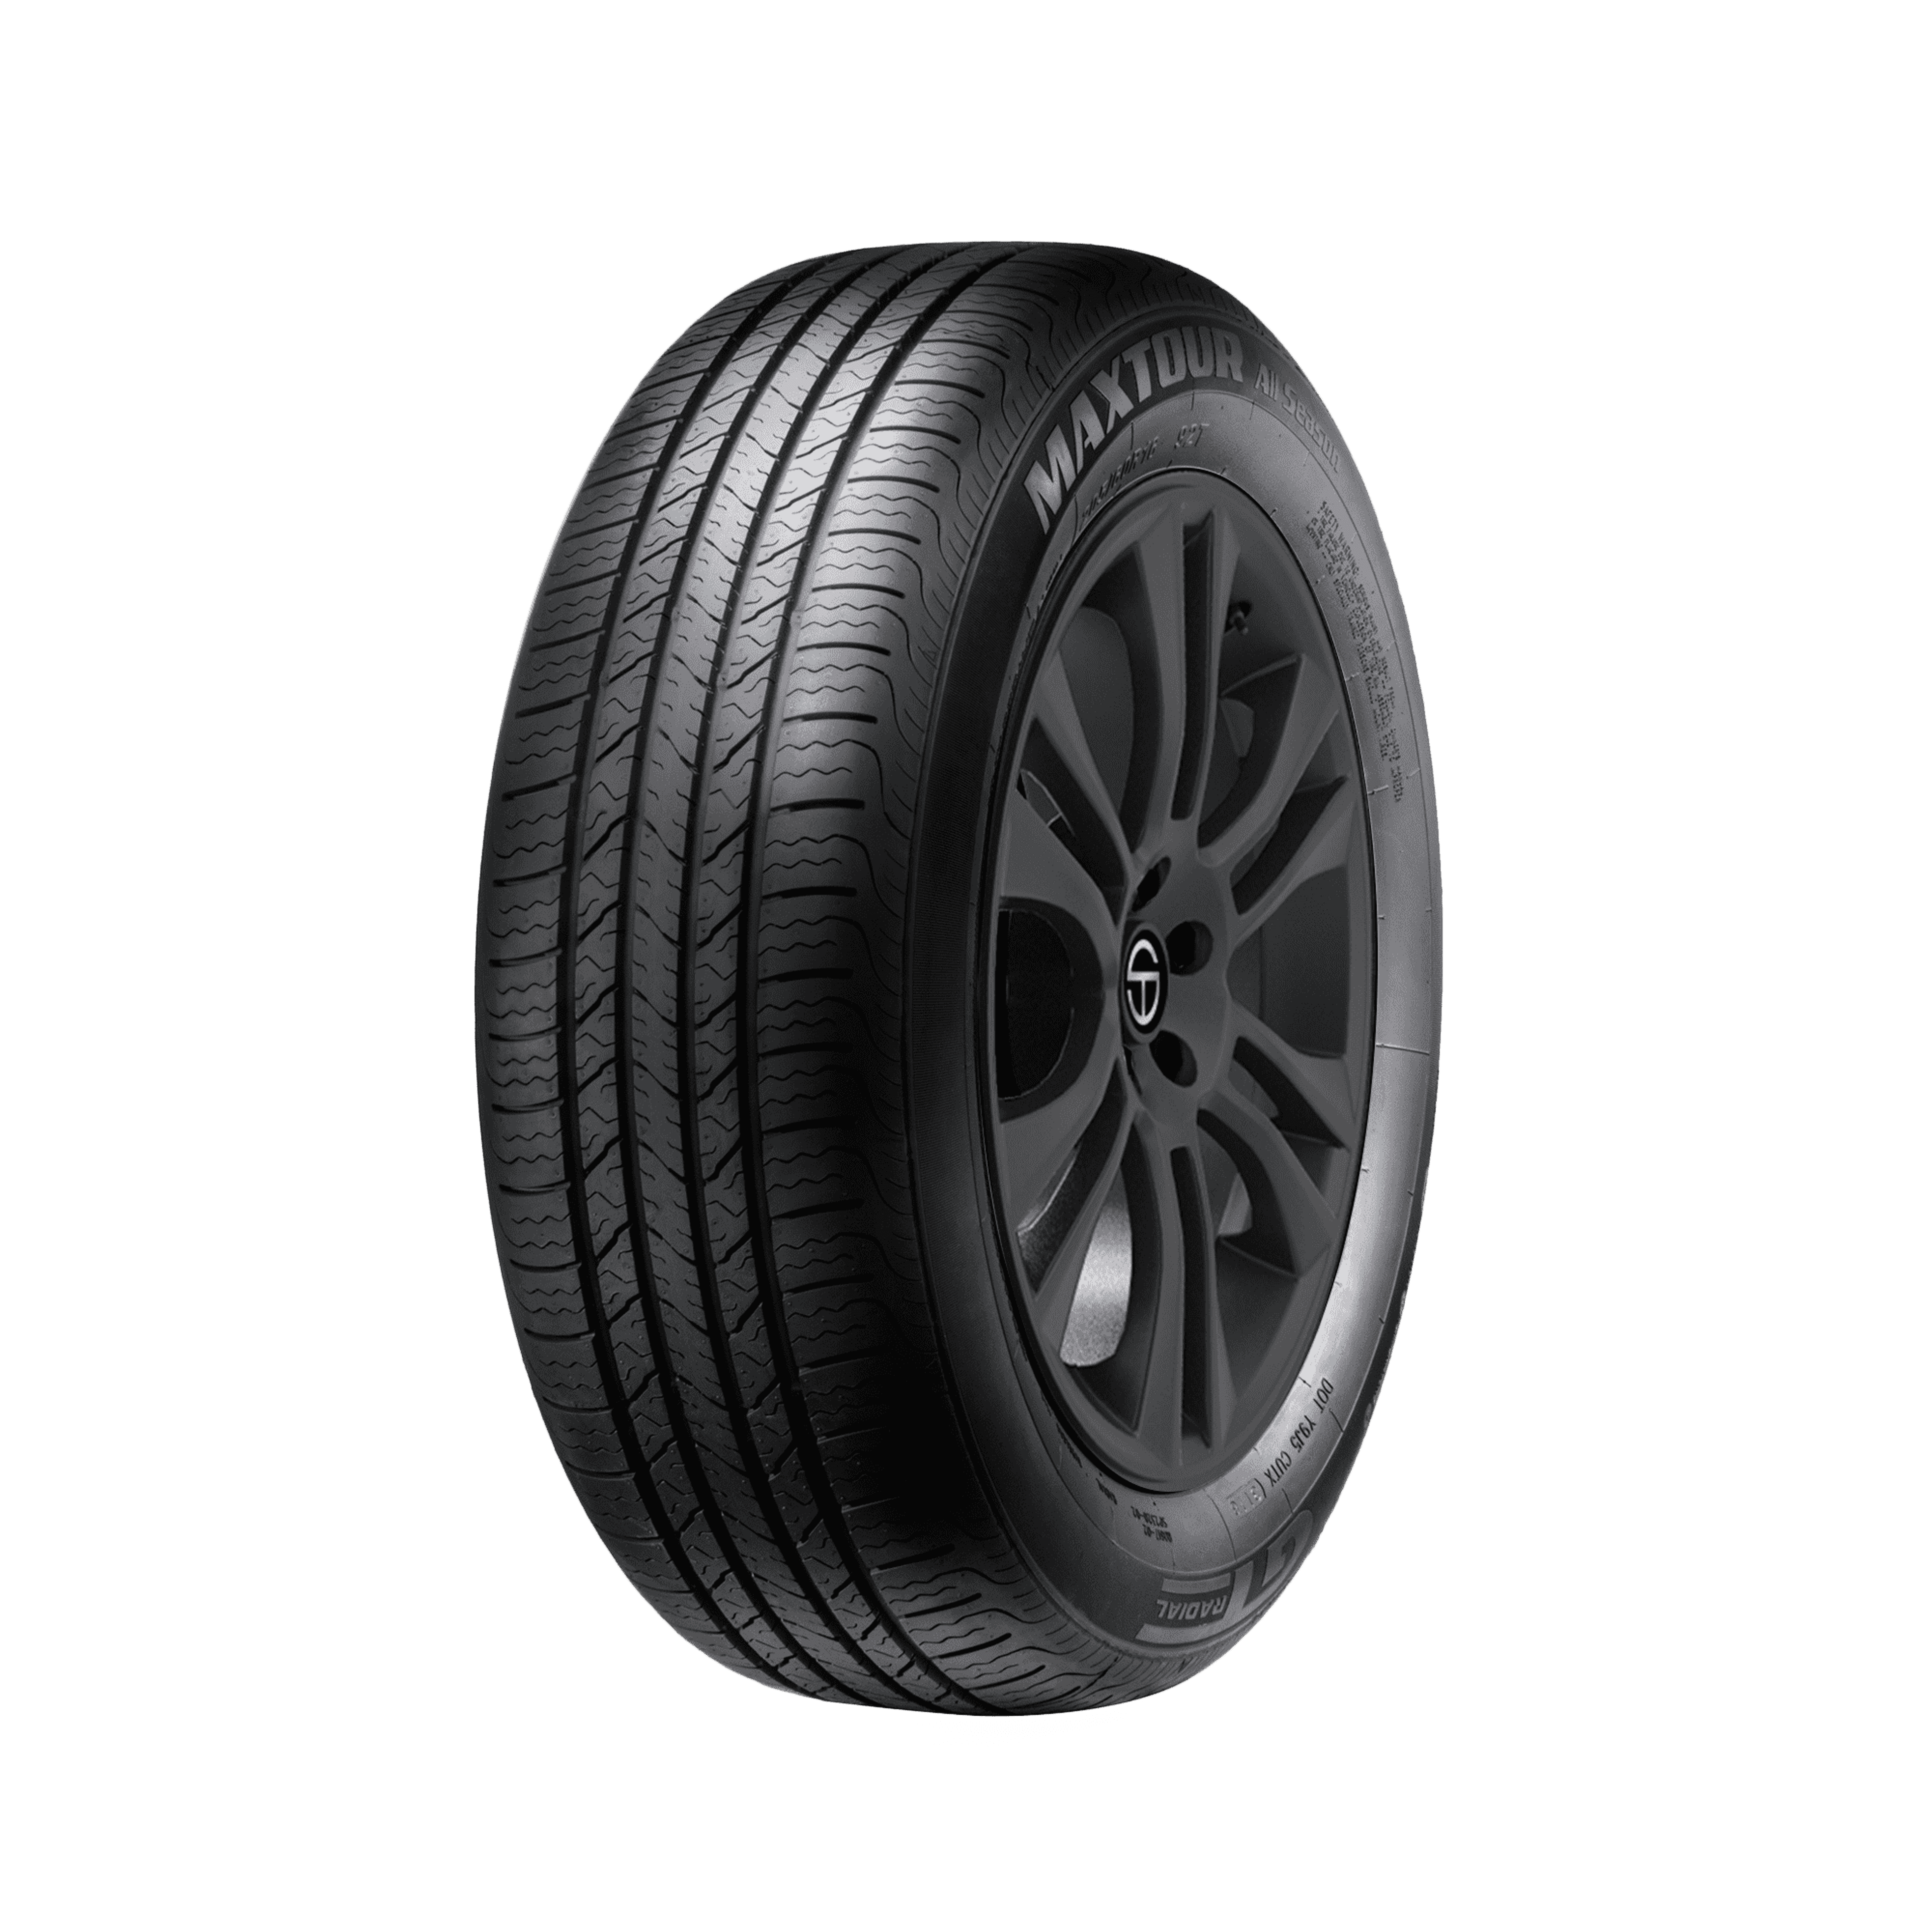 Buy GT Radial Maxtour All Online Season Tires SimpleTire 